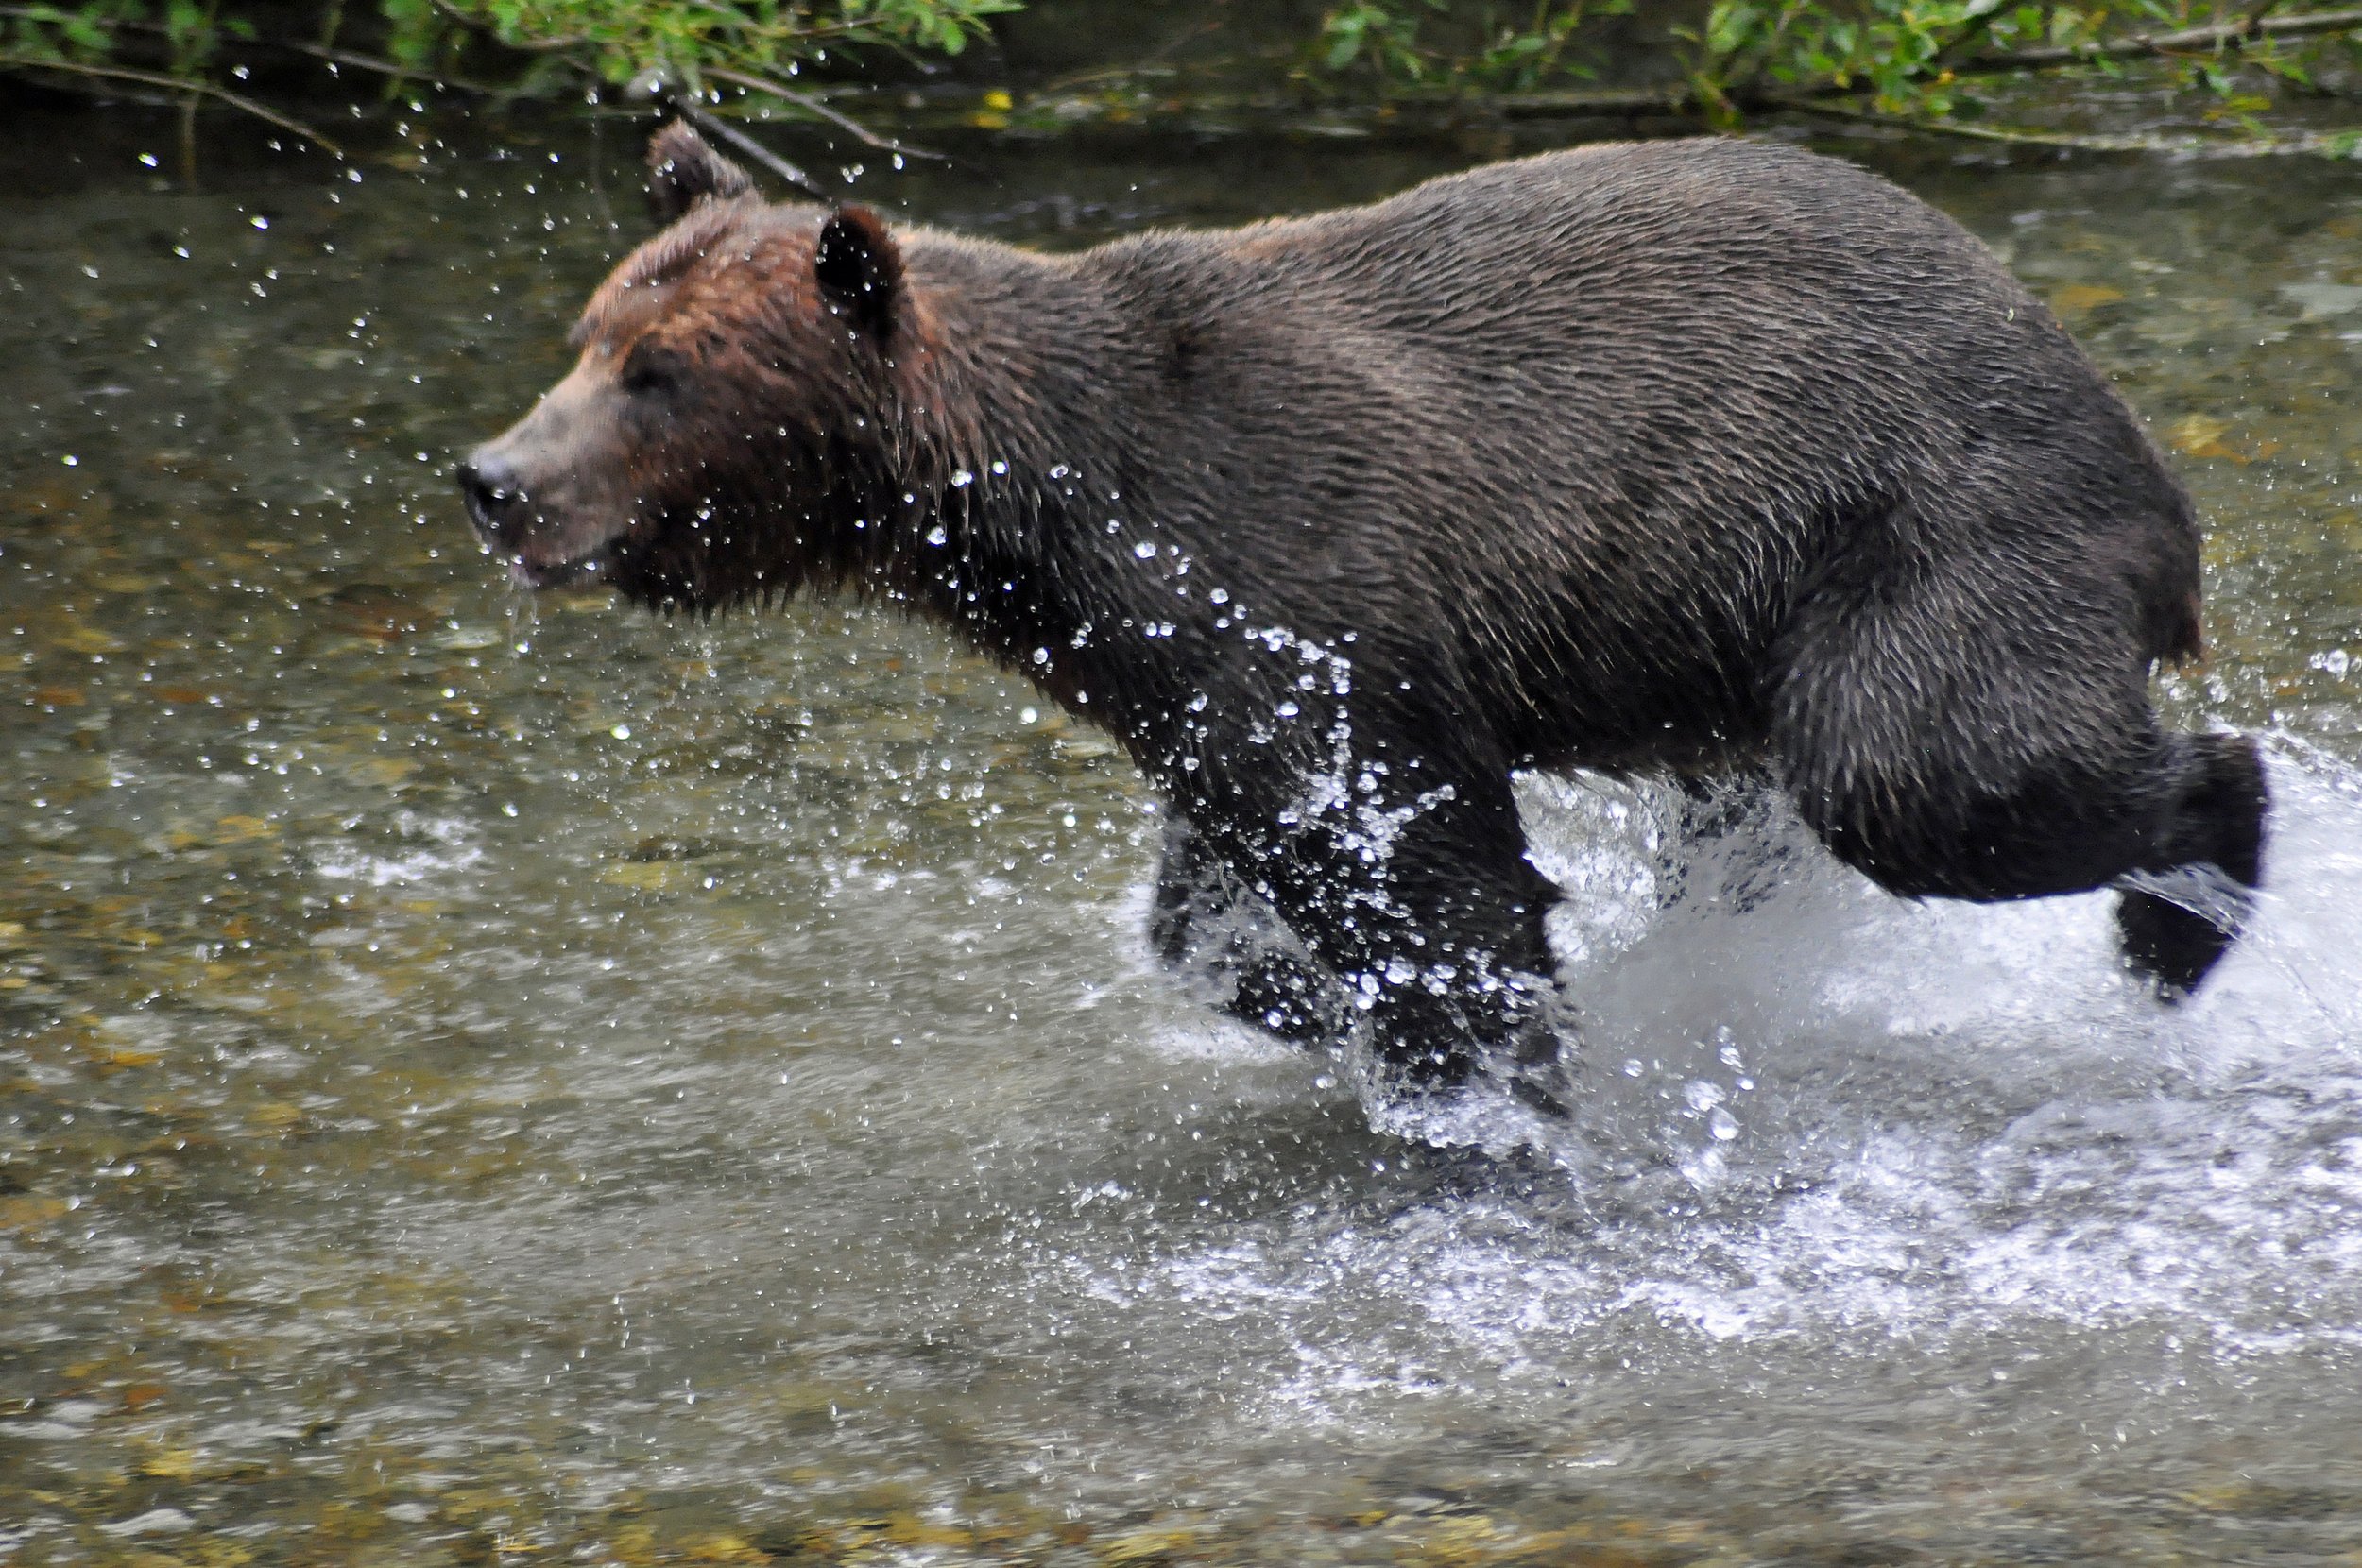  A grizzly fishes for salmon in Fish Creek near Hyder, AK. 